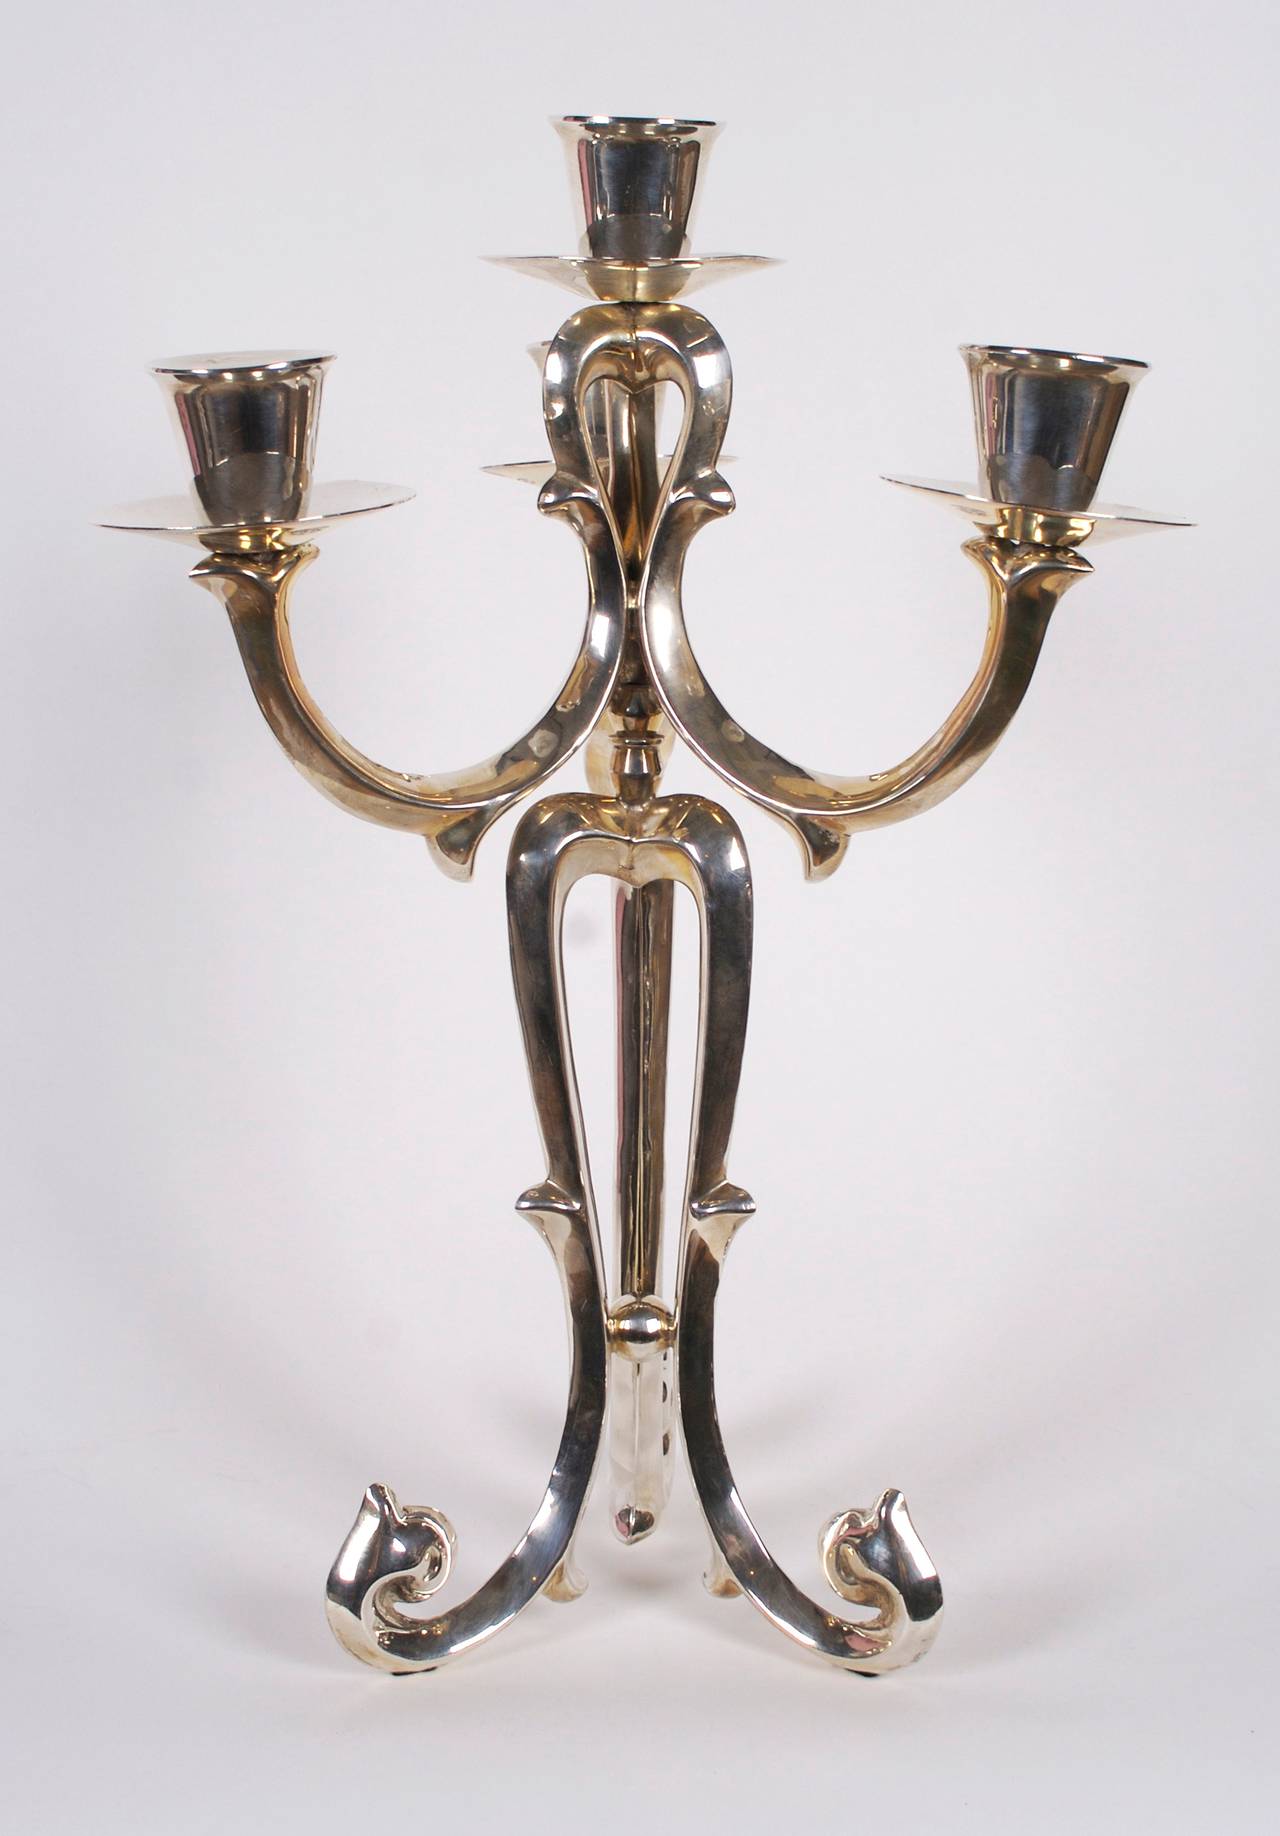 A pair of hand-wrought sterling silver candlesticks from Mexico, early 20th century. Each marked as indicated in photo, 